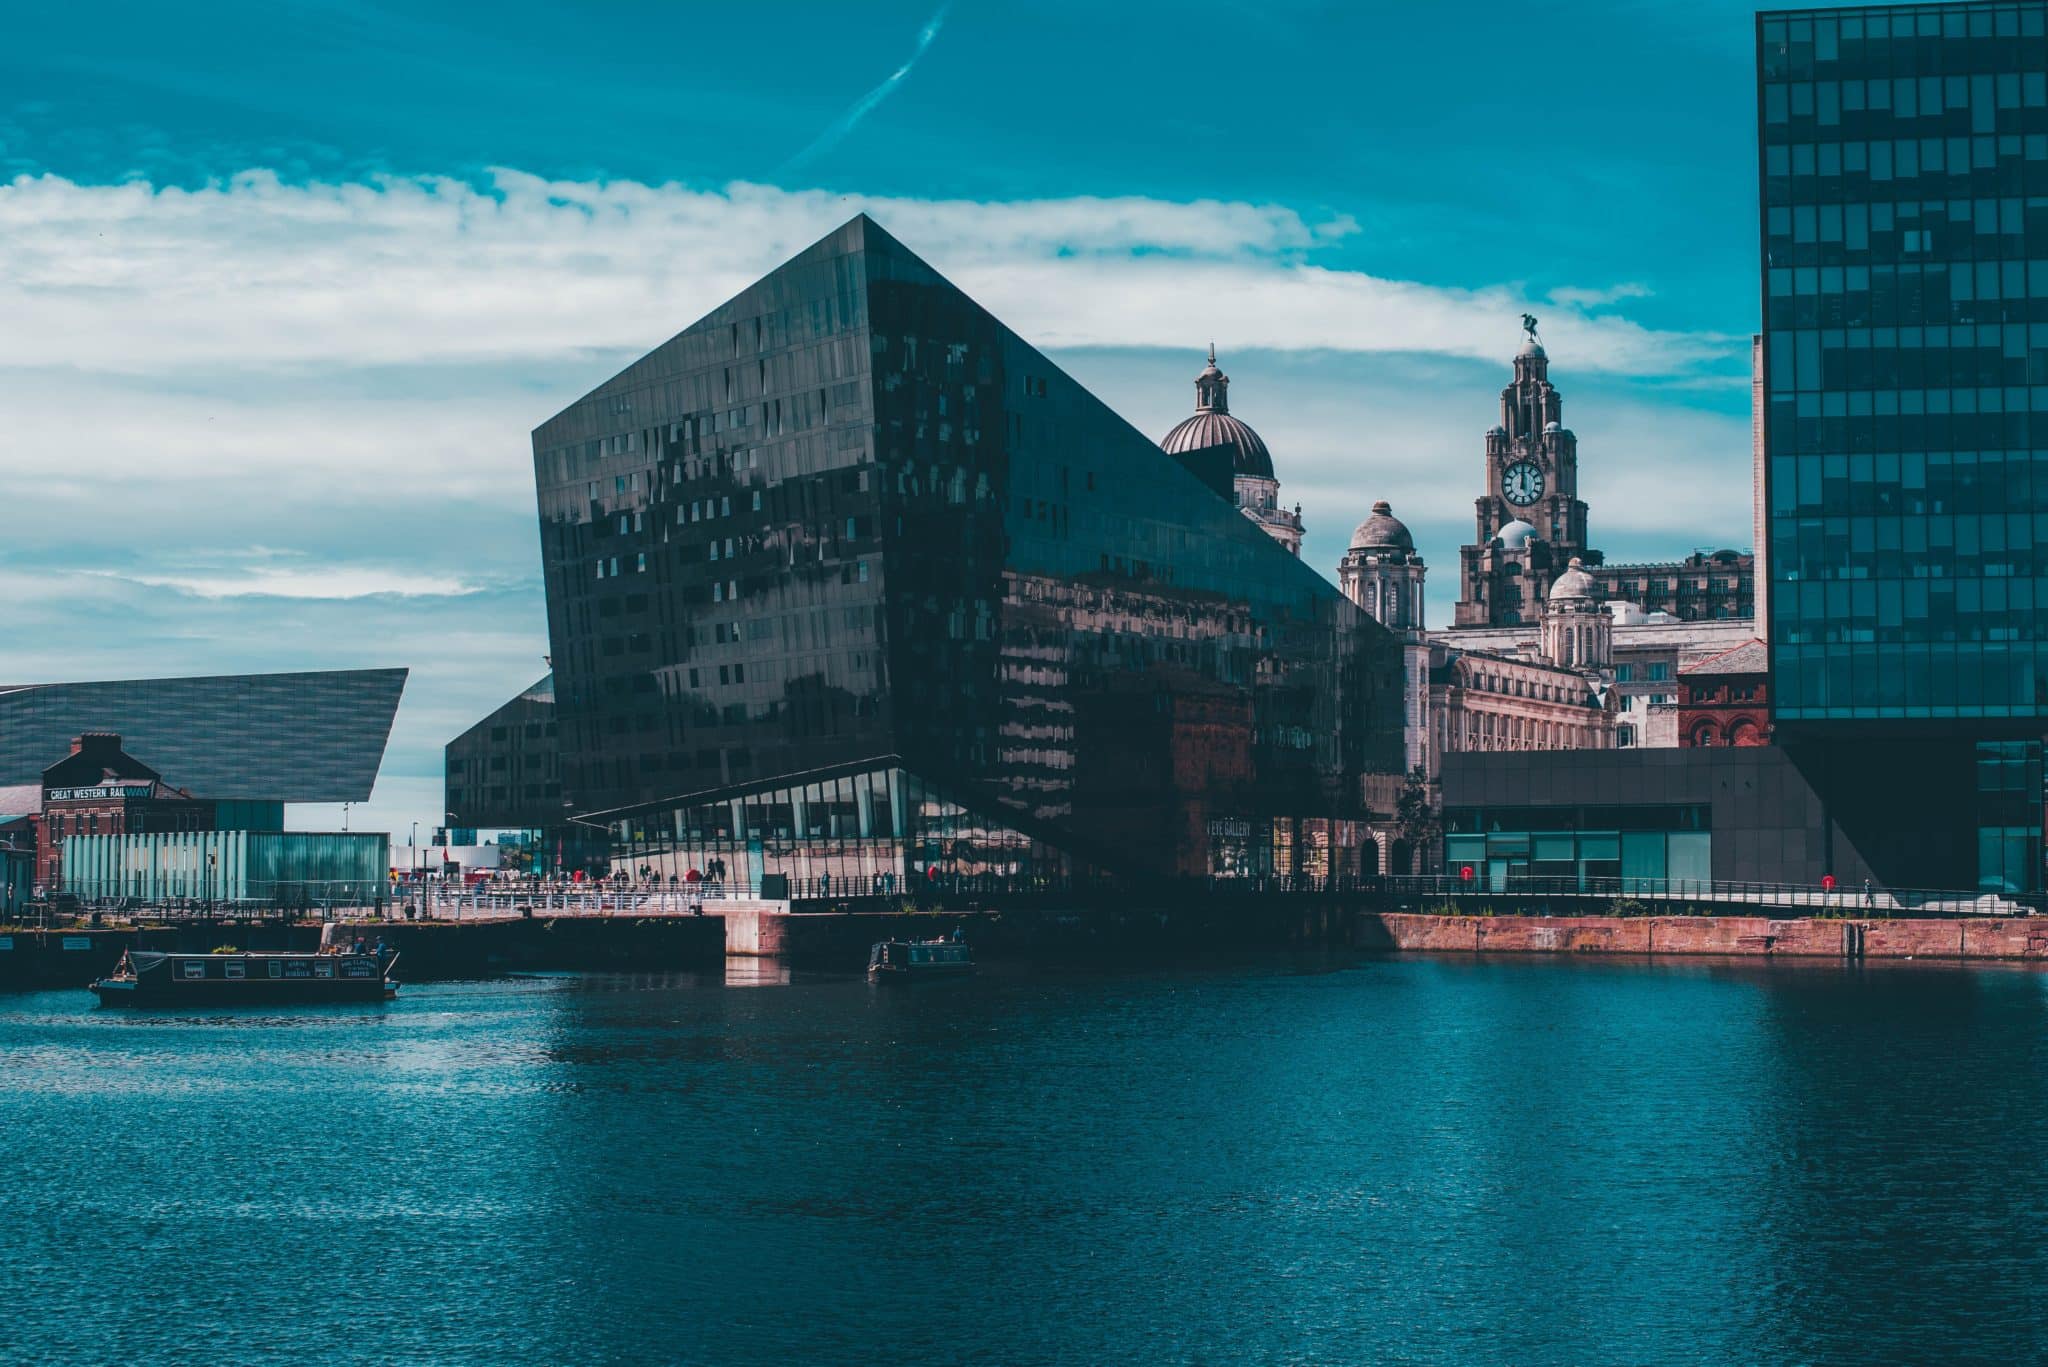 The Open Eye Gallery in Liverpool as seen from a distance across the water on a clear day, and its surrounding buildings. 